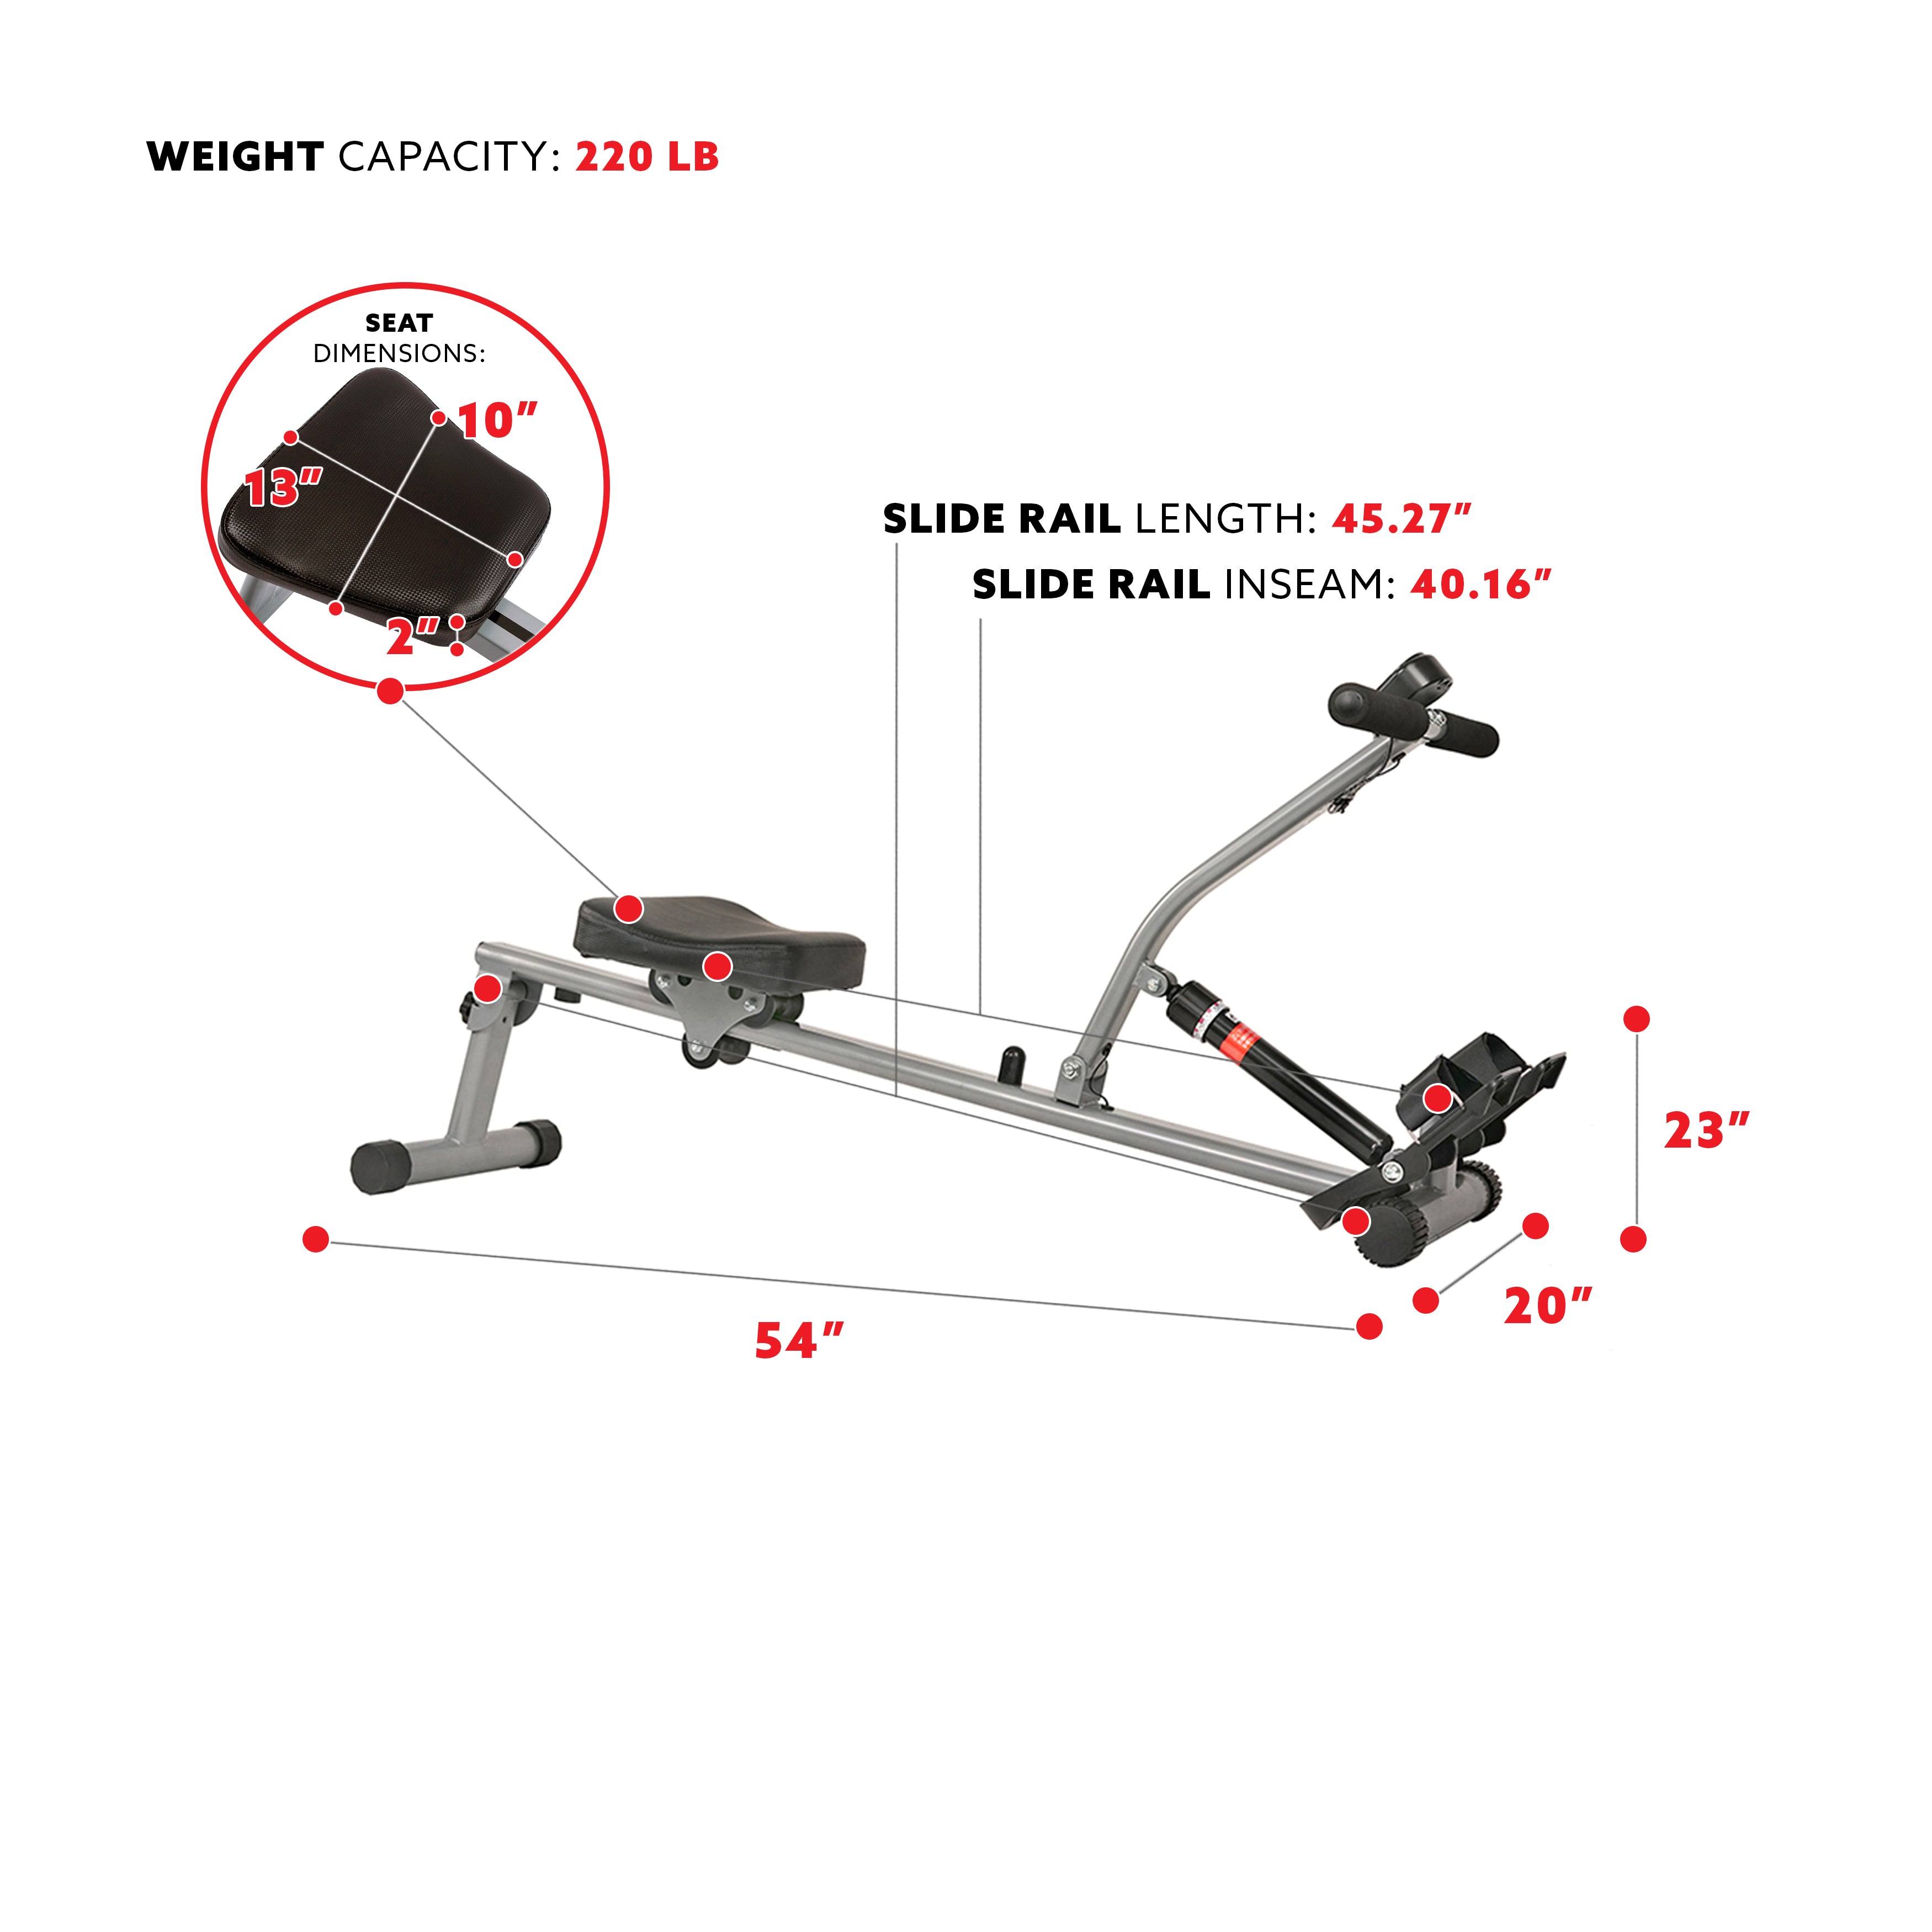 Start With Indoor Rowing & The PB Extreme Rower